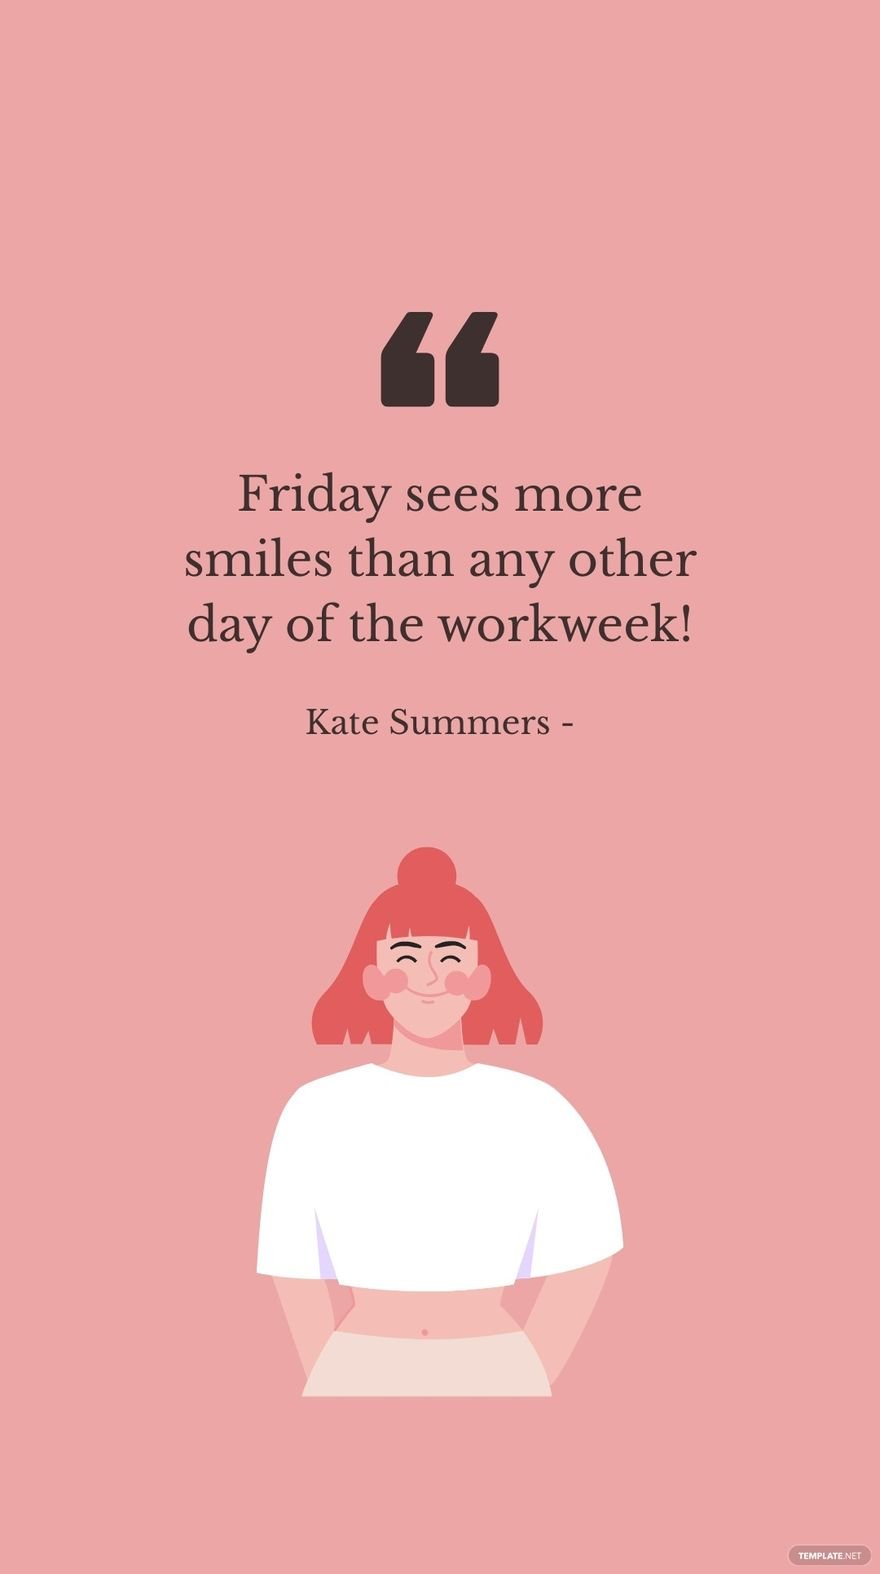 Kate Summers - Friday sees more smiles than any other day of the workweek!